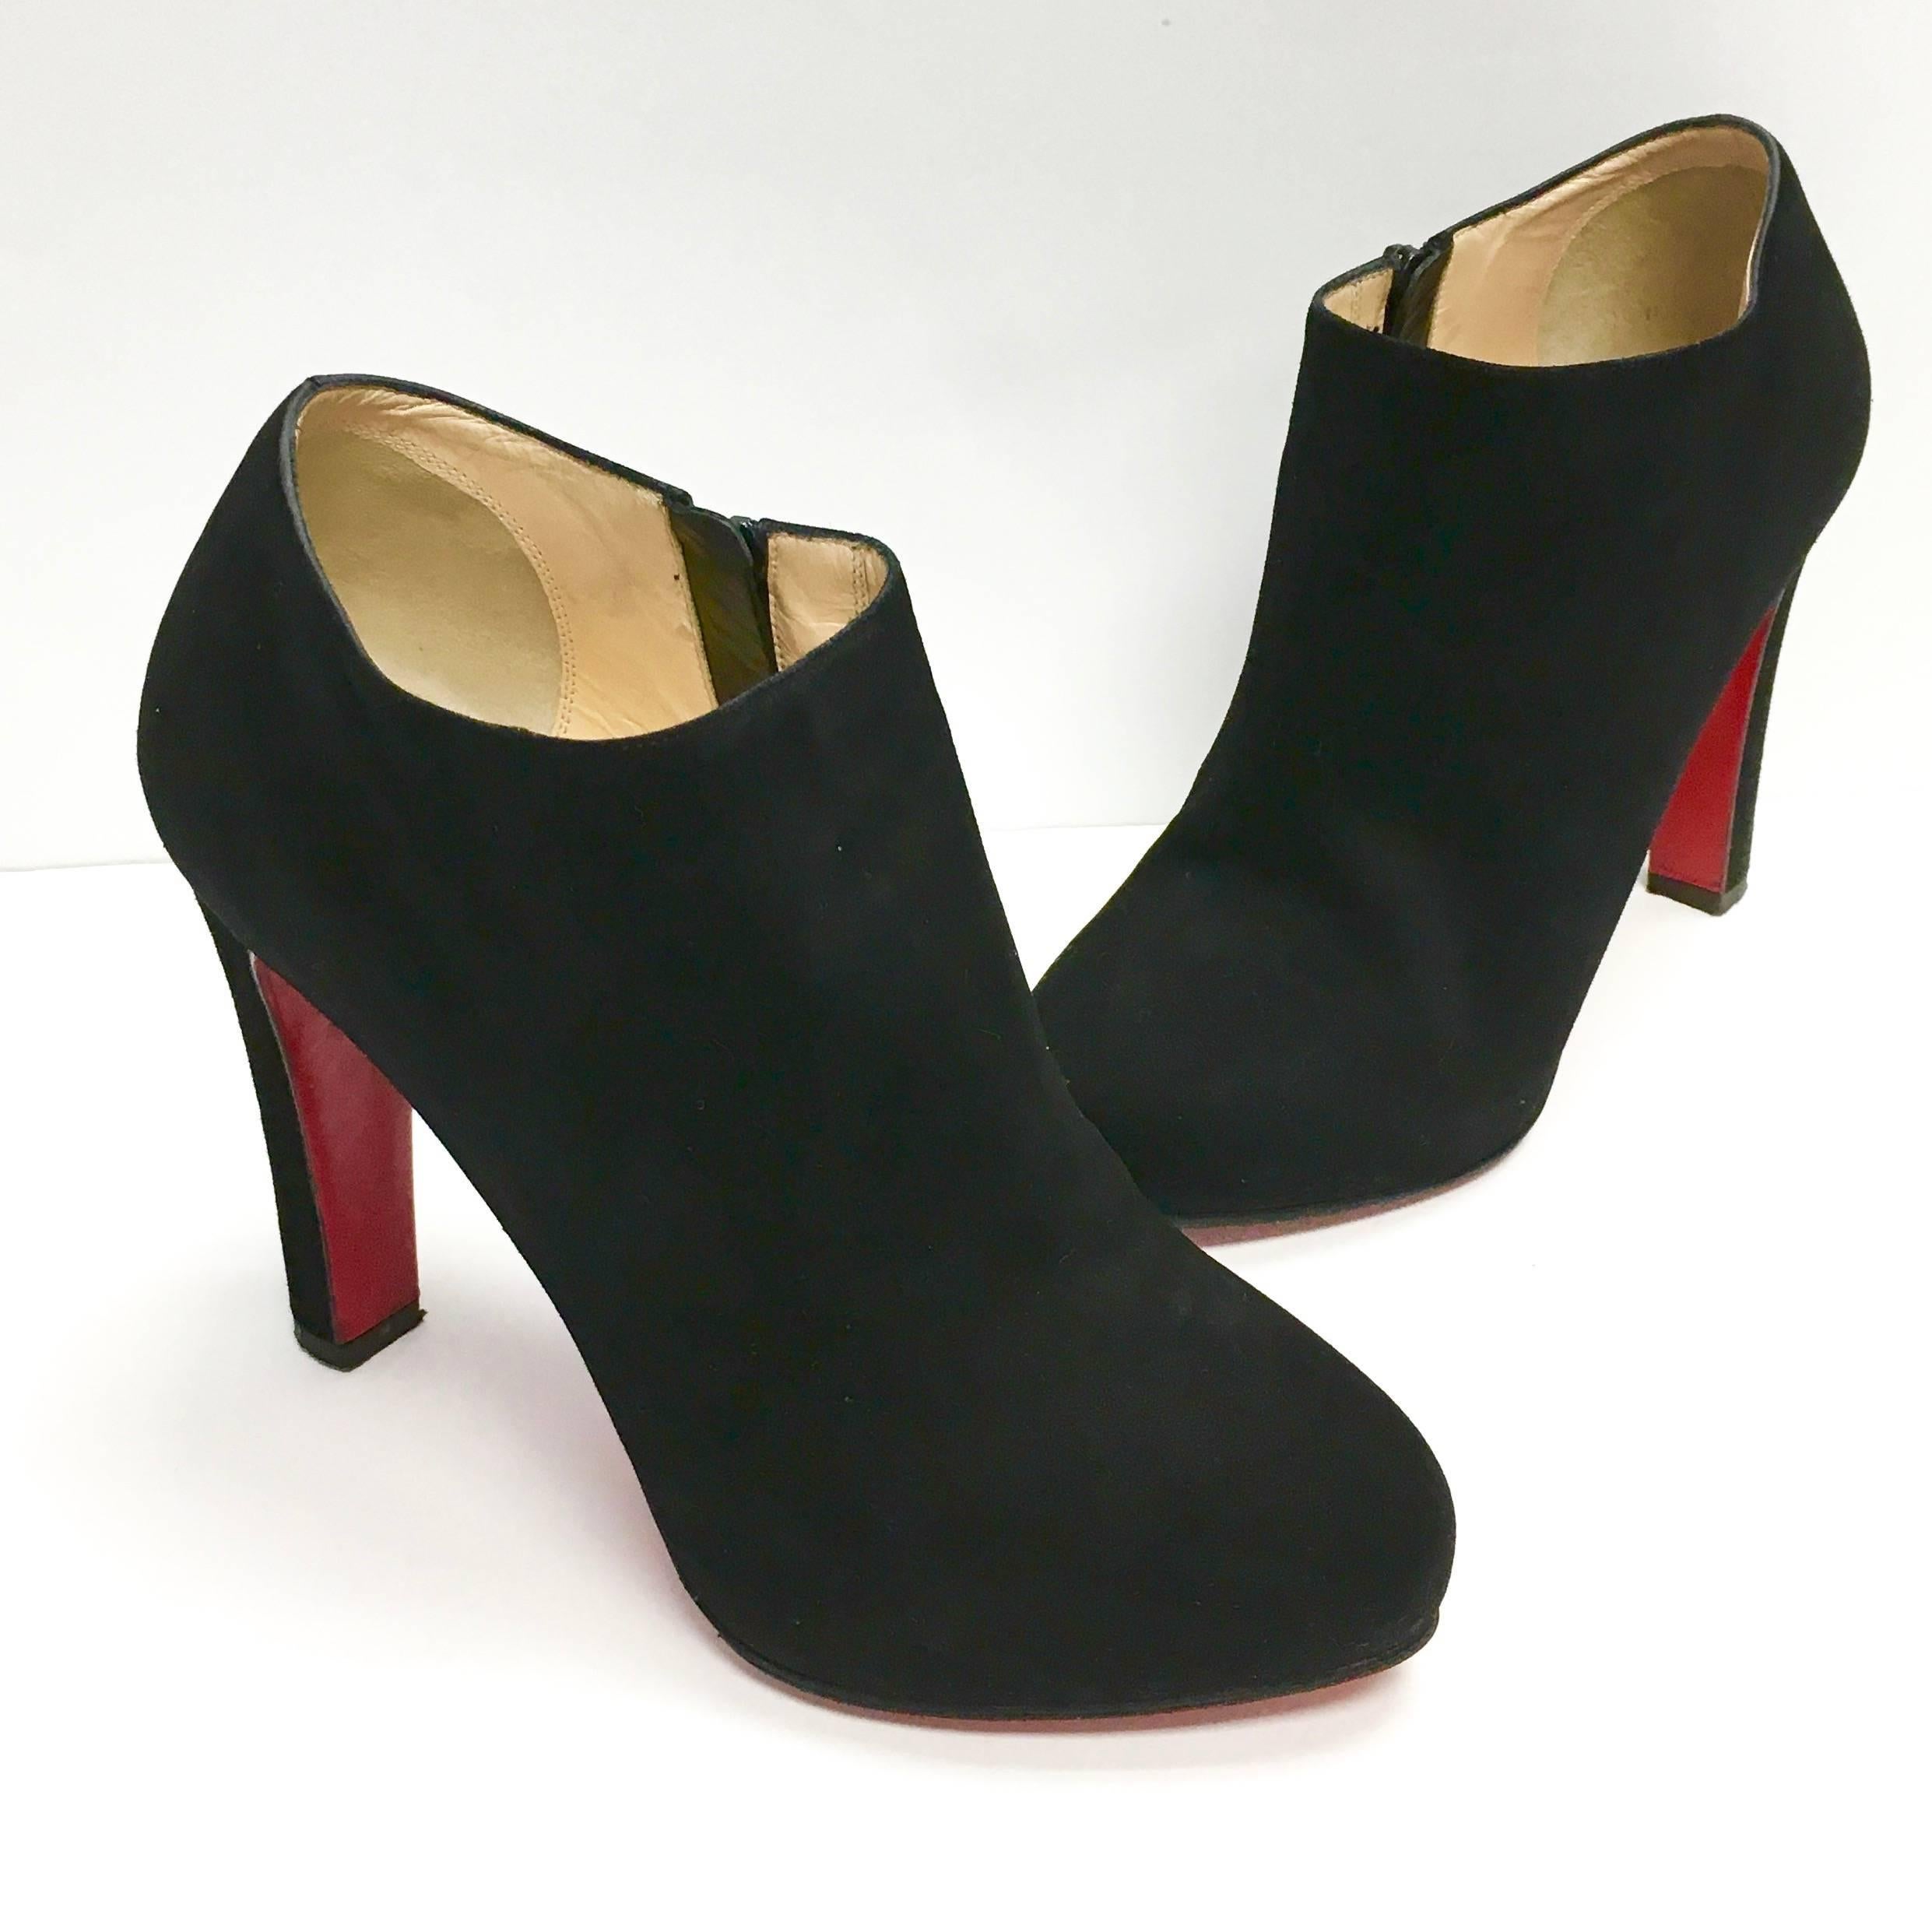 CHRISTIAN LOUBOUTIN Vicky Booty 120 Black Suede Red Bottom Ankle 